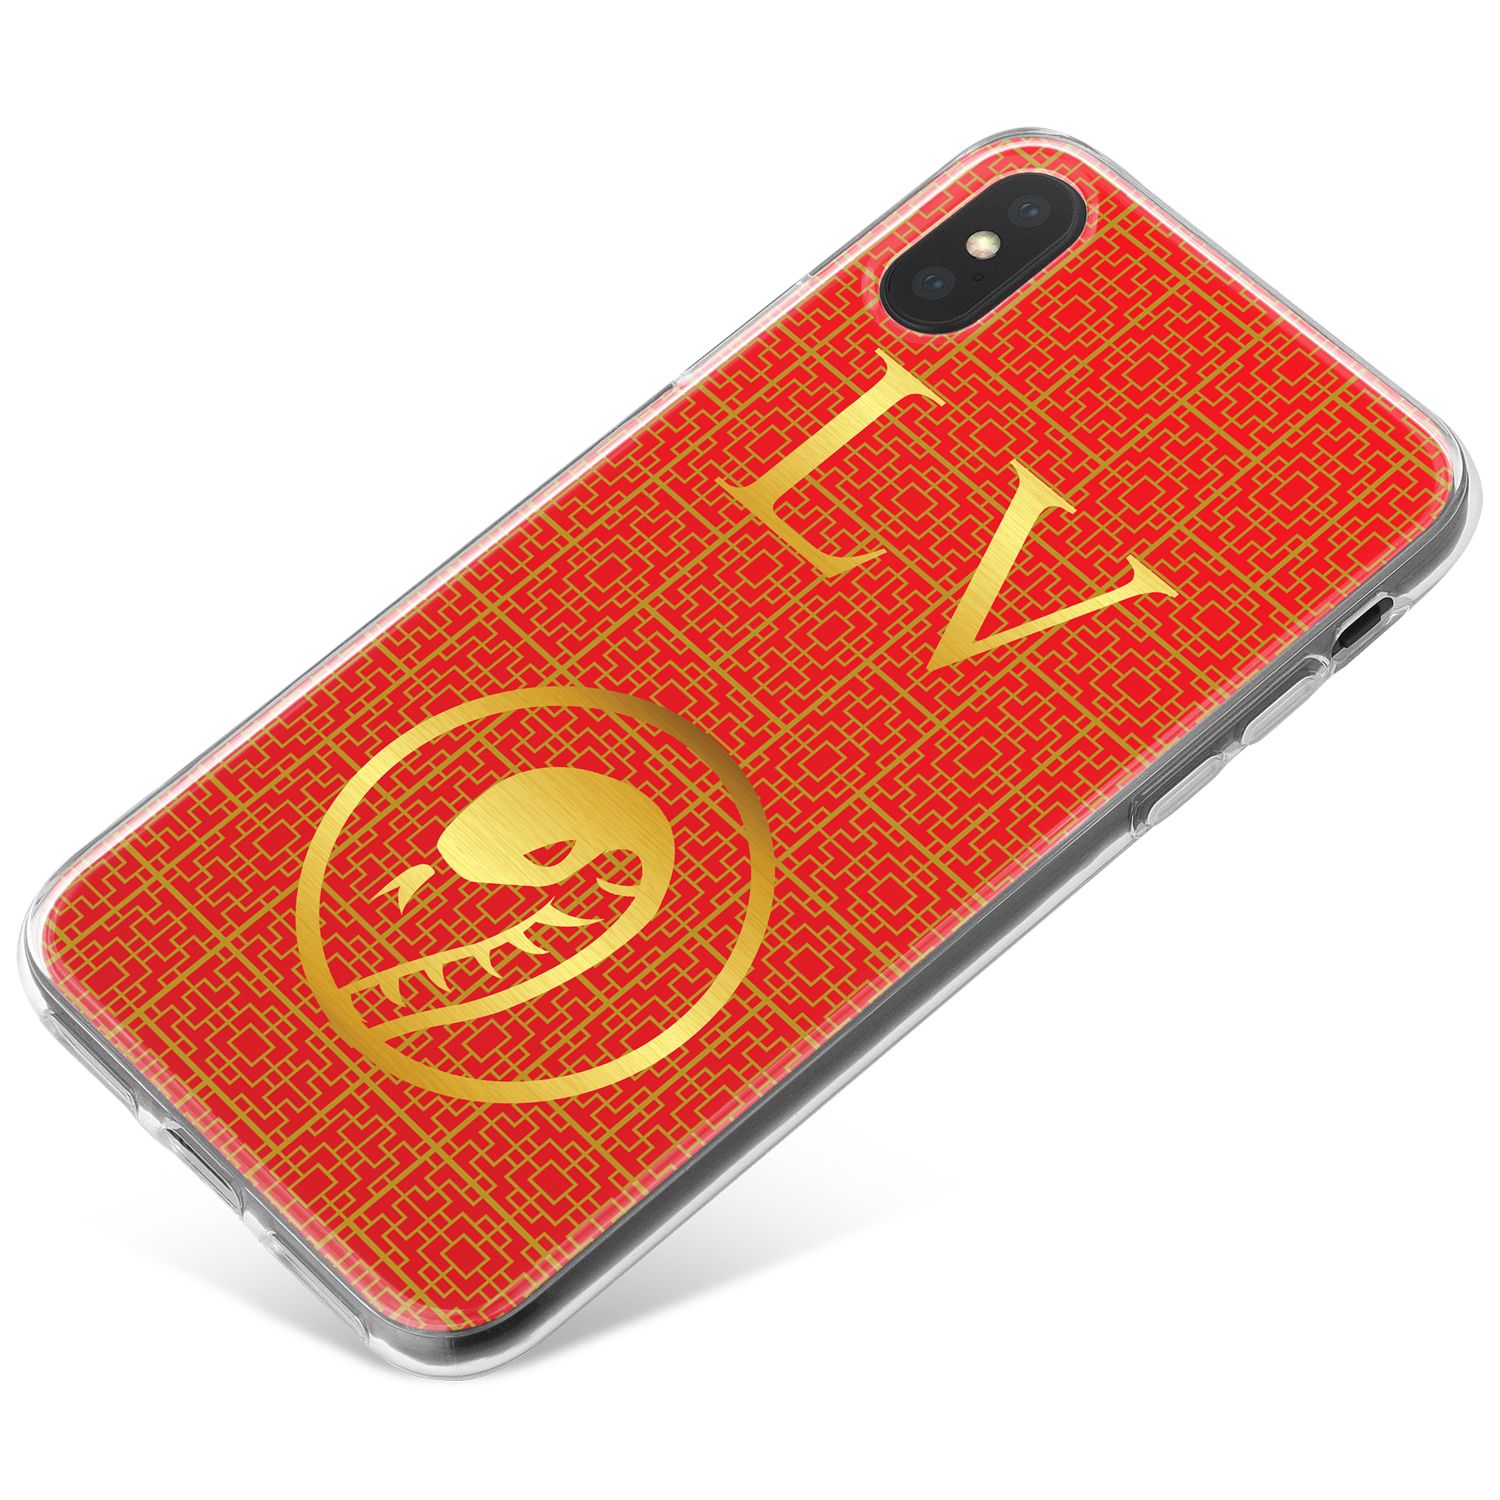 LOUIS VUITTON LV LOGO PATTERN RED iPhone 8 Plus Case Cover